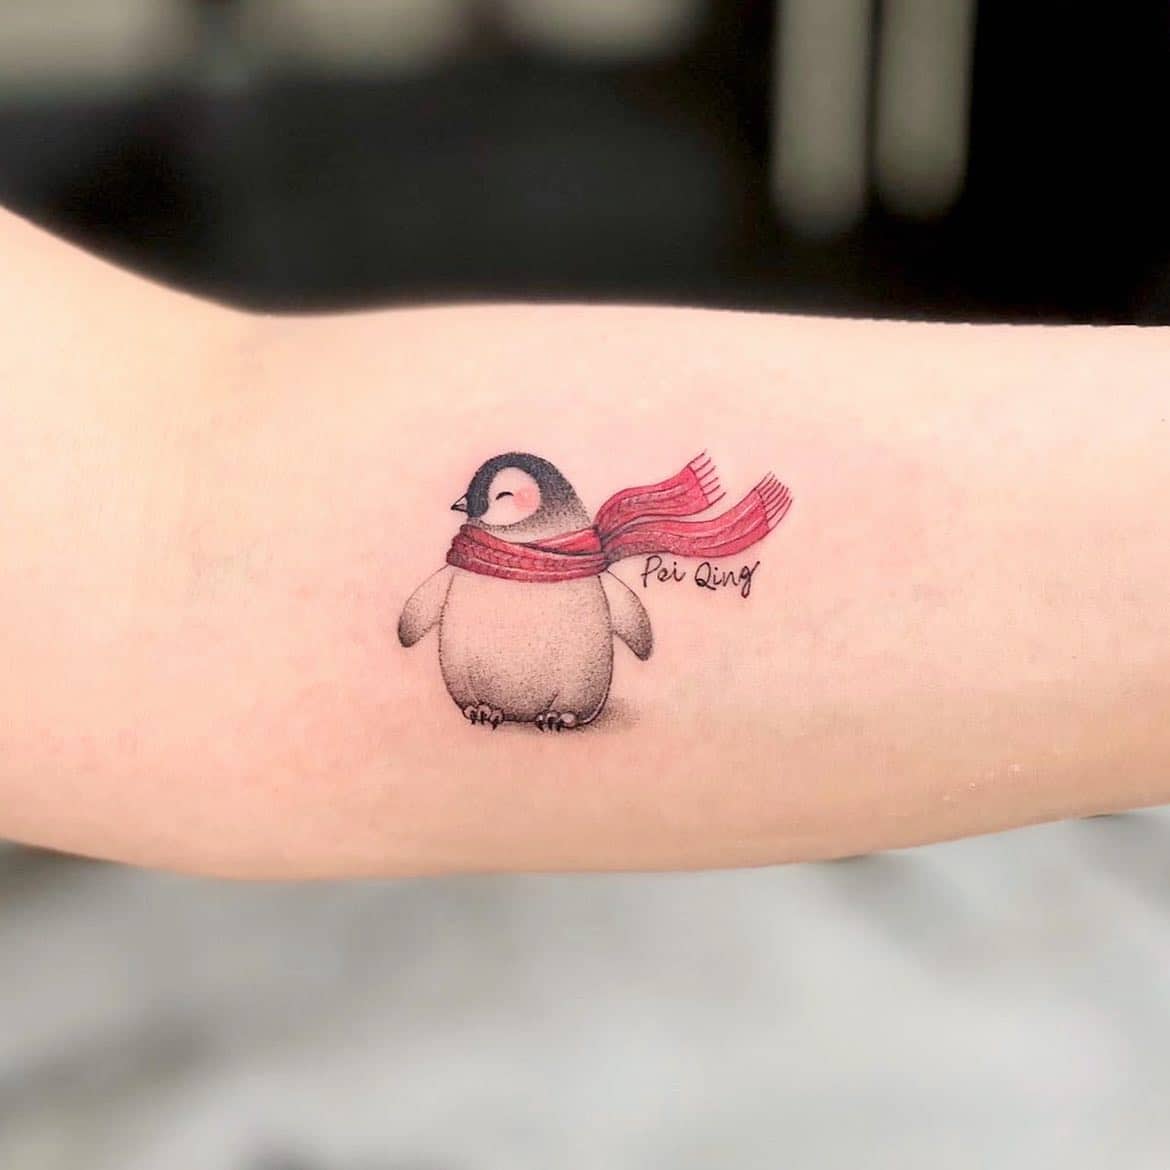 Penguin tattoo designs by cathylee